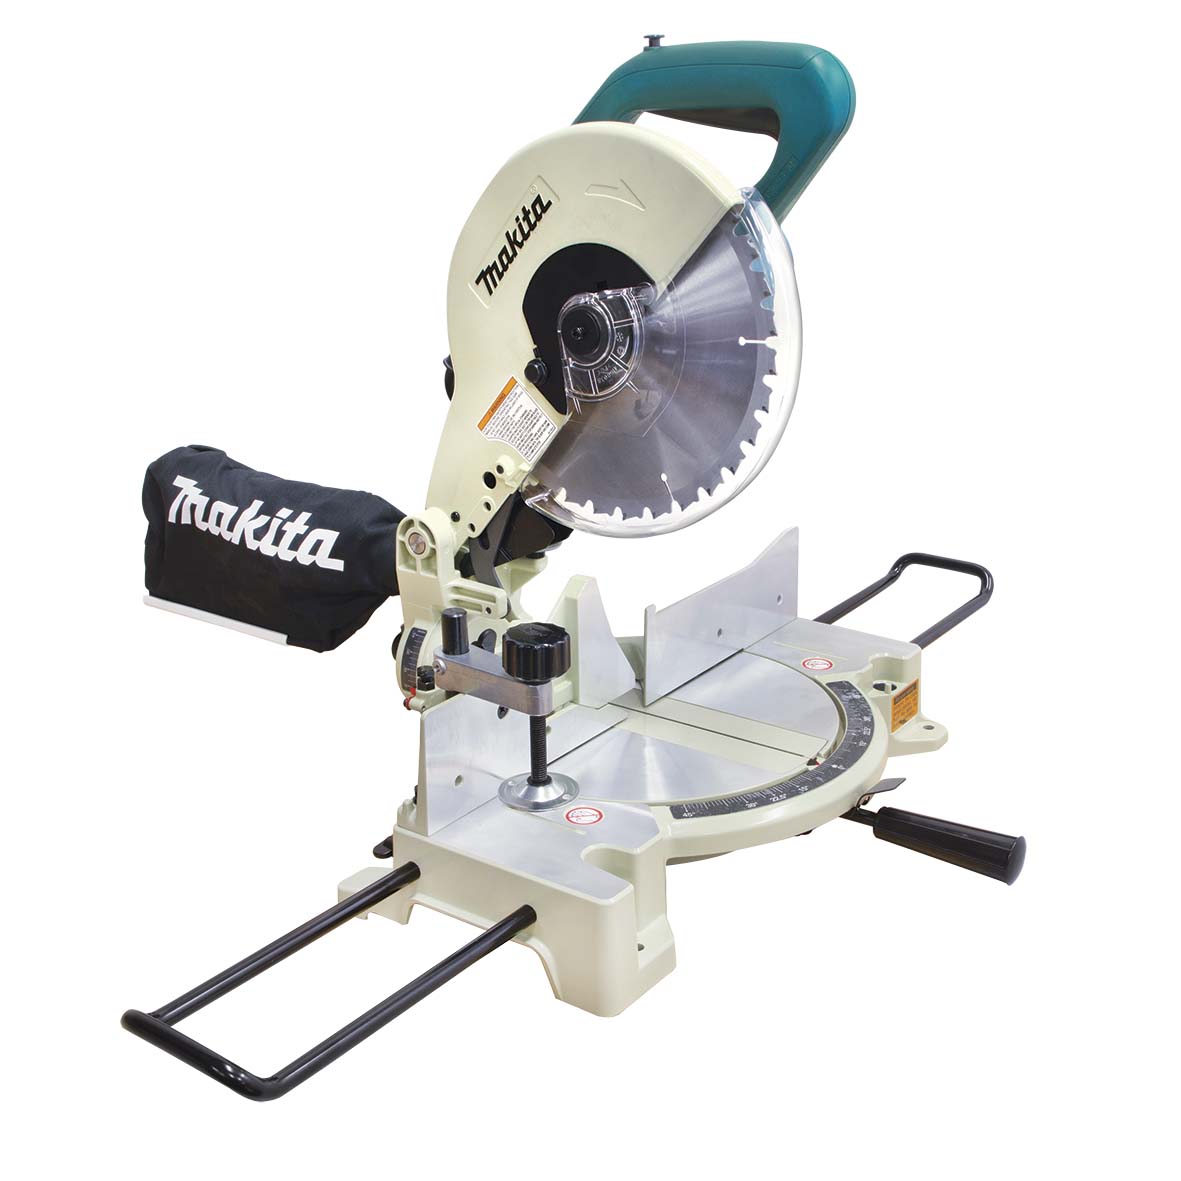 255mm (10") Compound Saw LS1040 by Makita